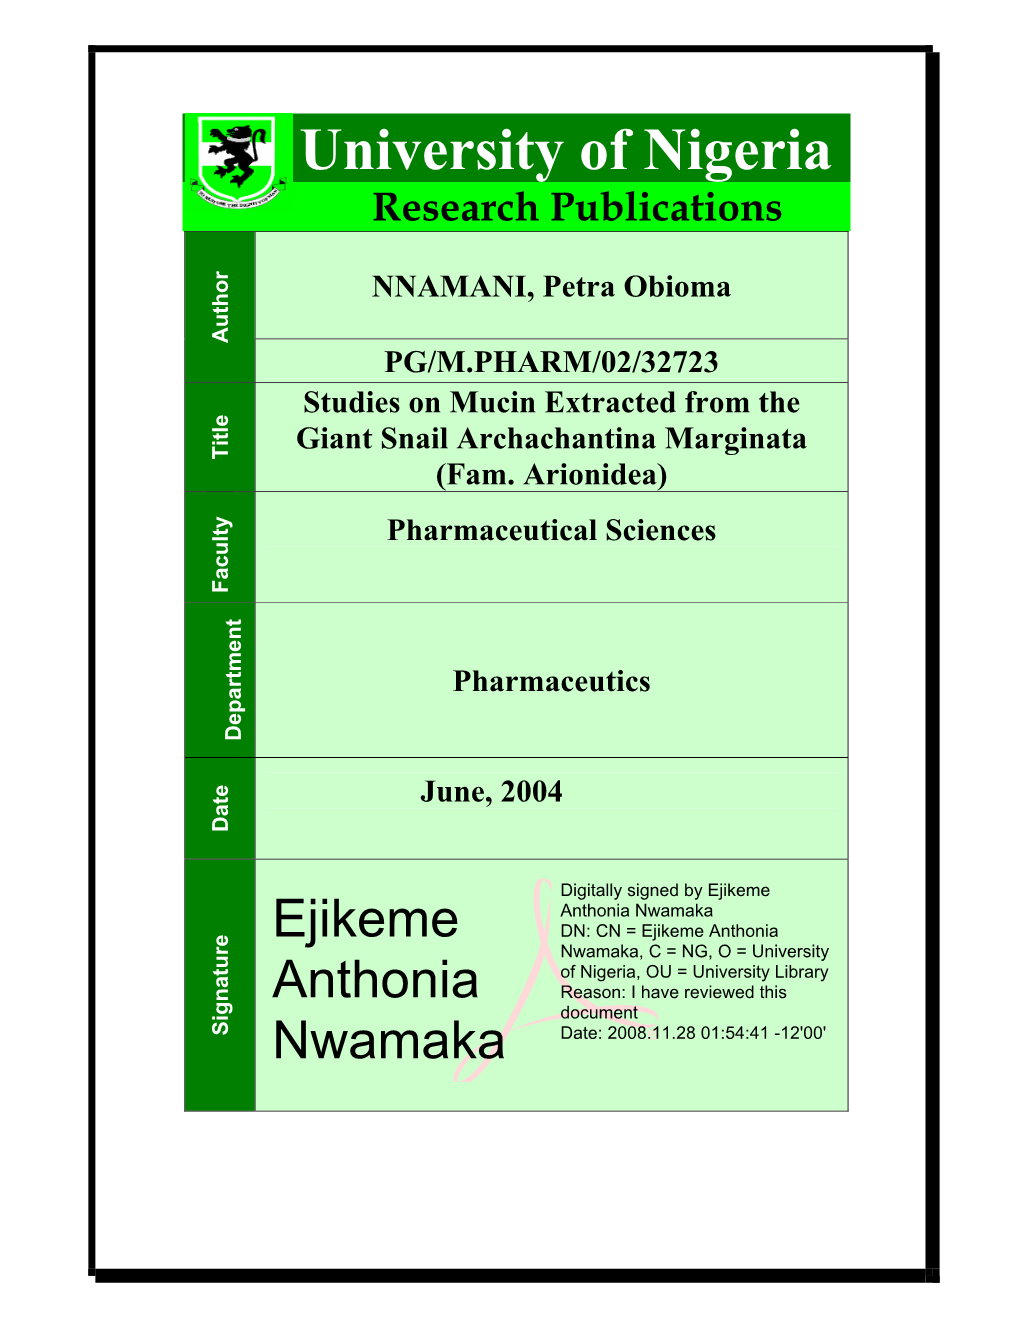 University of Nigeria Research Publications